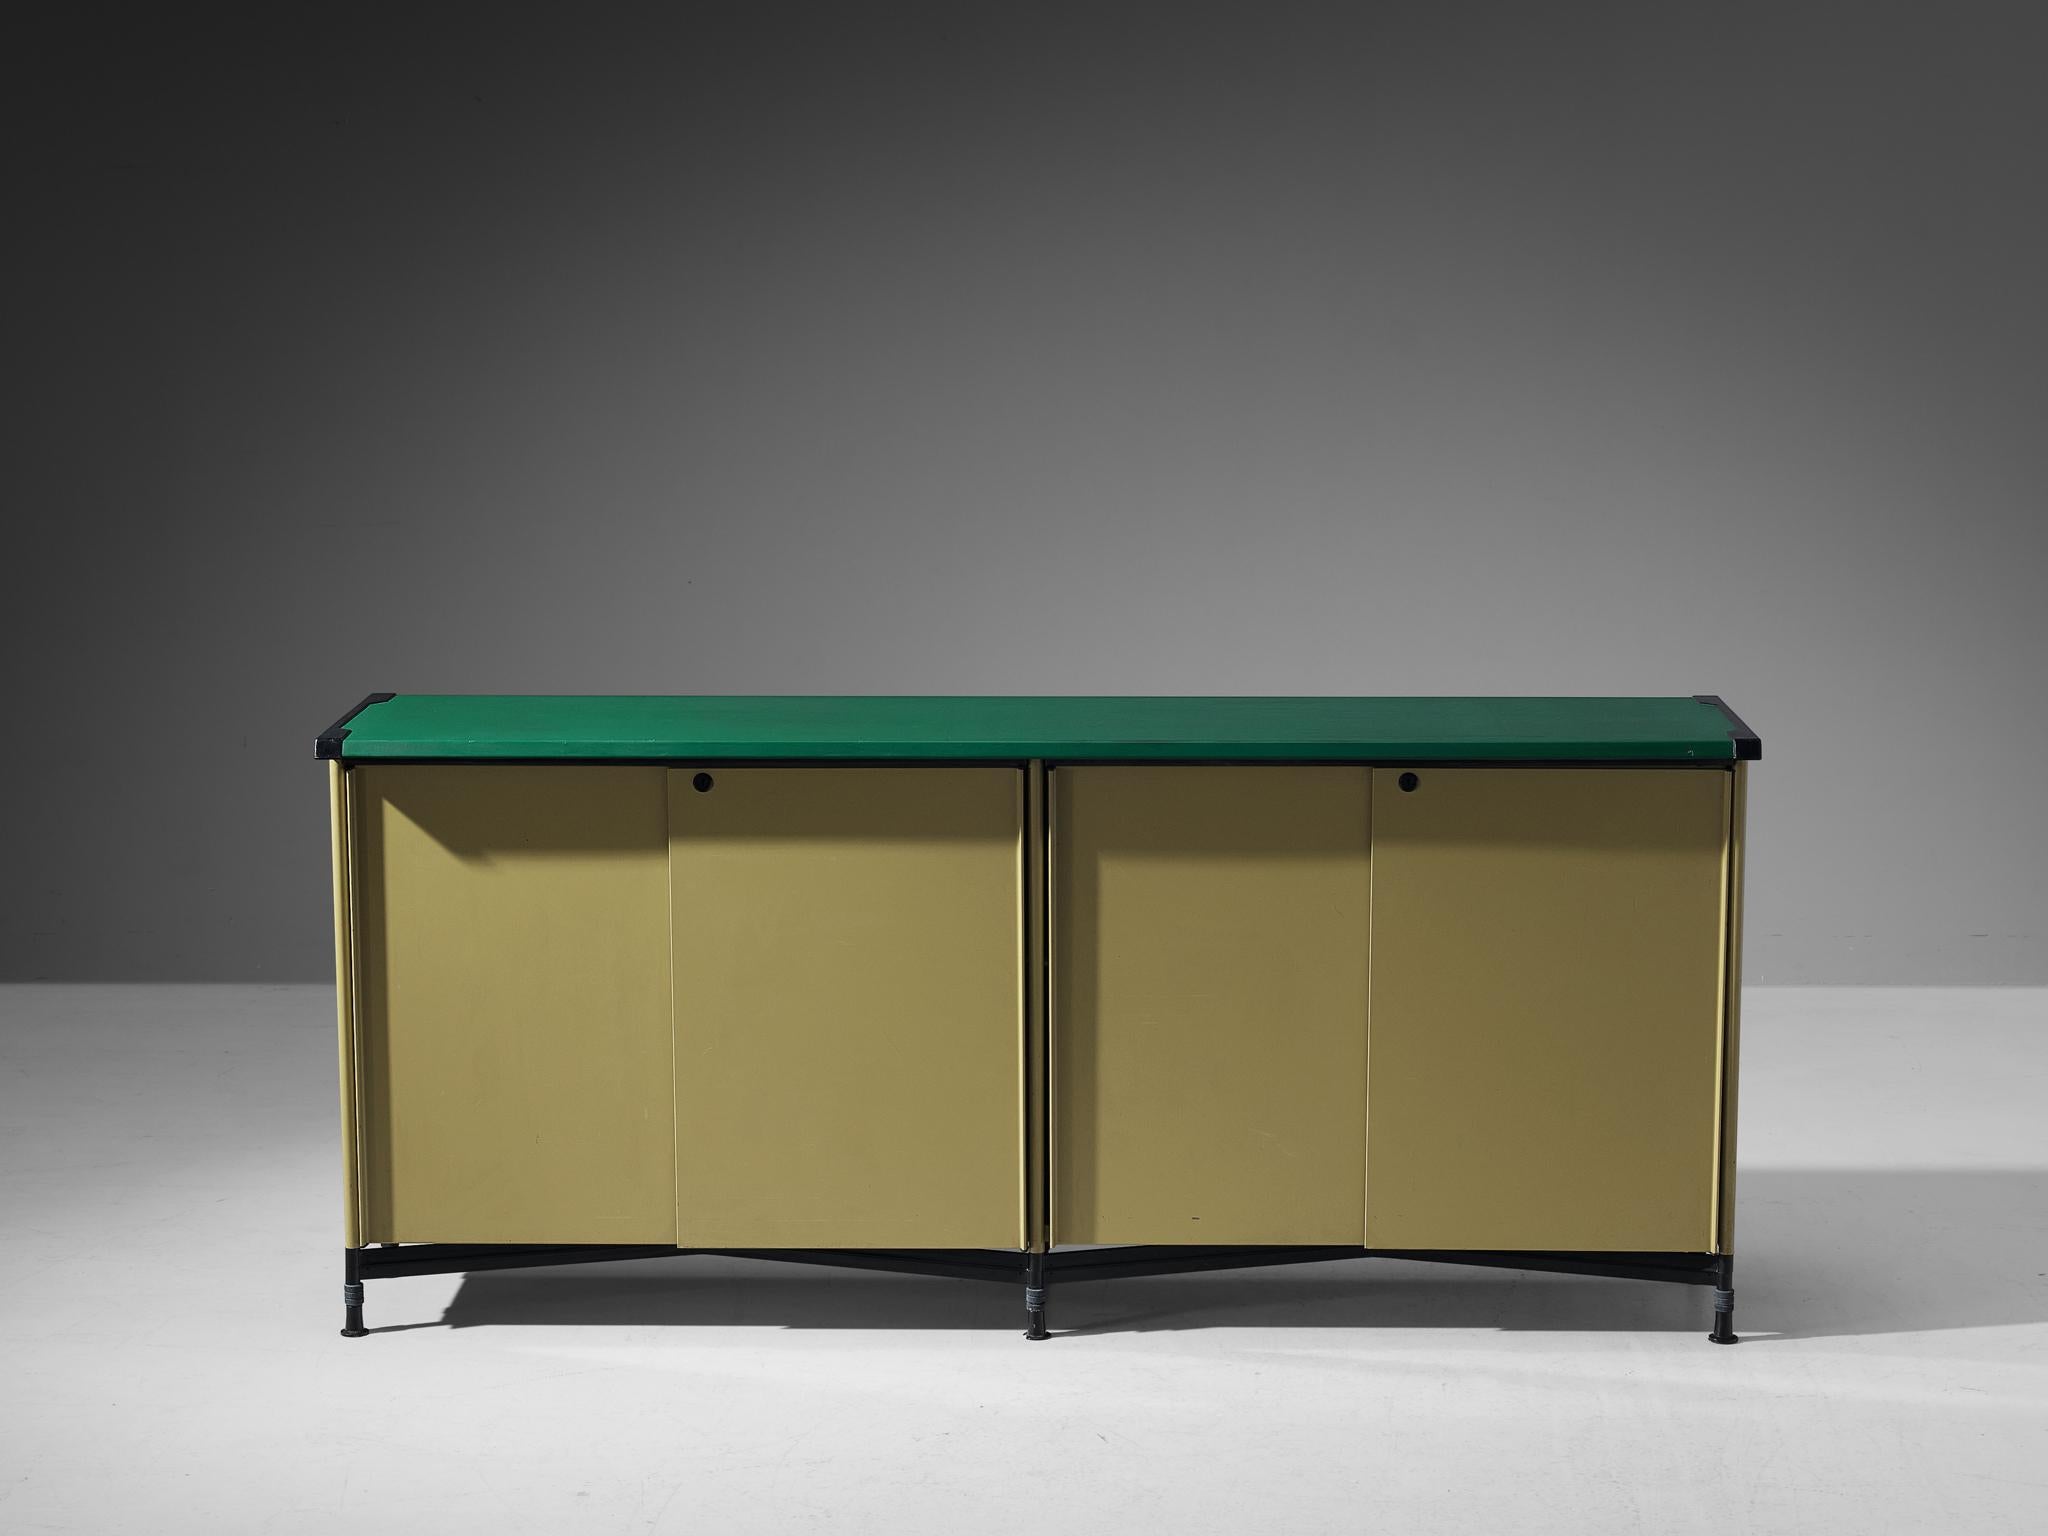 Studio BBPR for Olivetti, 'Spazio' sideboard, steel, vinyl, plastic, Italy, design 1959/60, production 1960s 

In 1954, Olivetti, the Italian office equipment manufacturer, hired BBPR to design their New York showroom on Fifth Avenue and to create